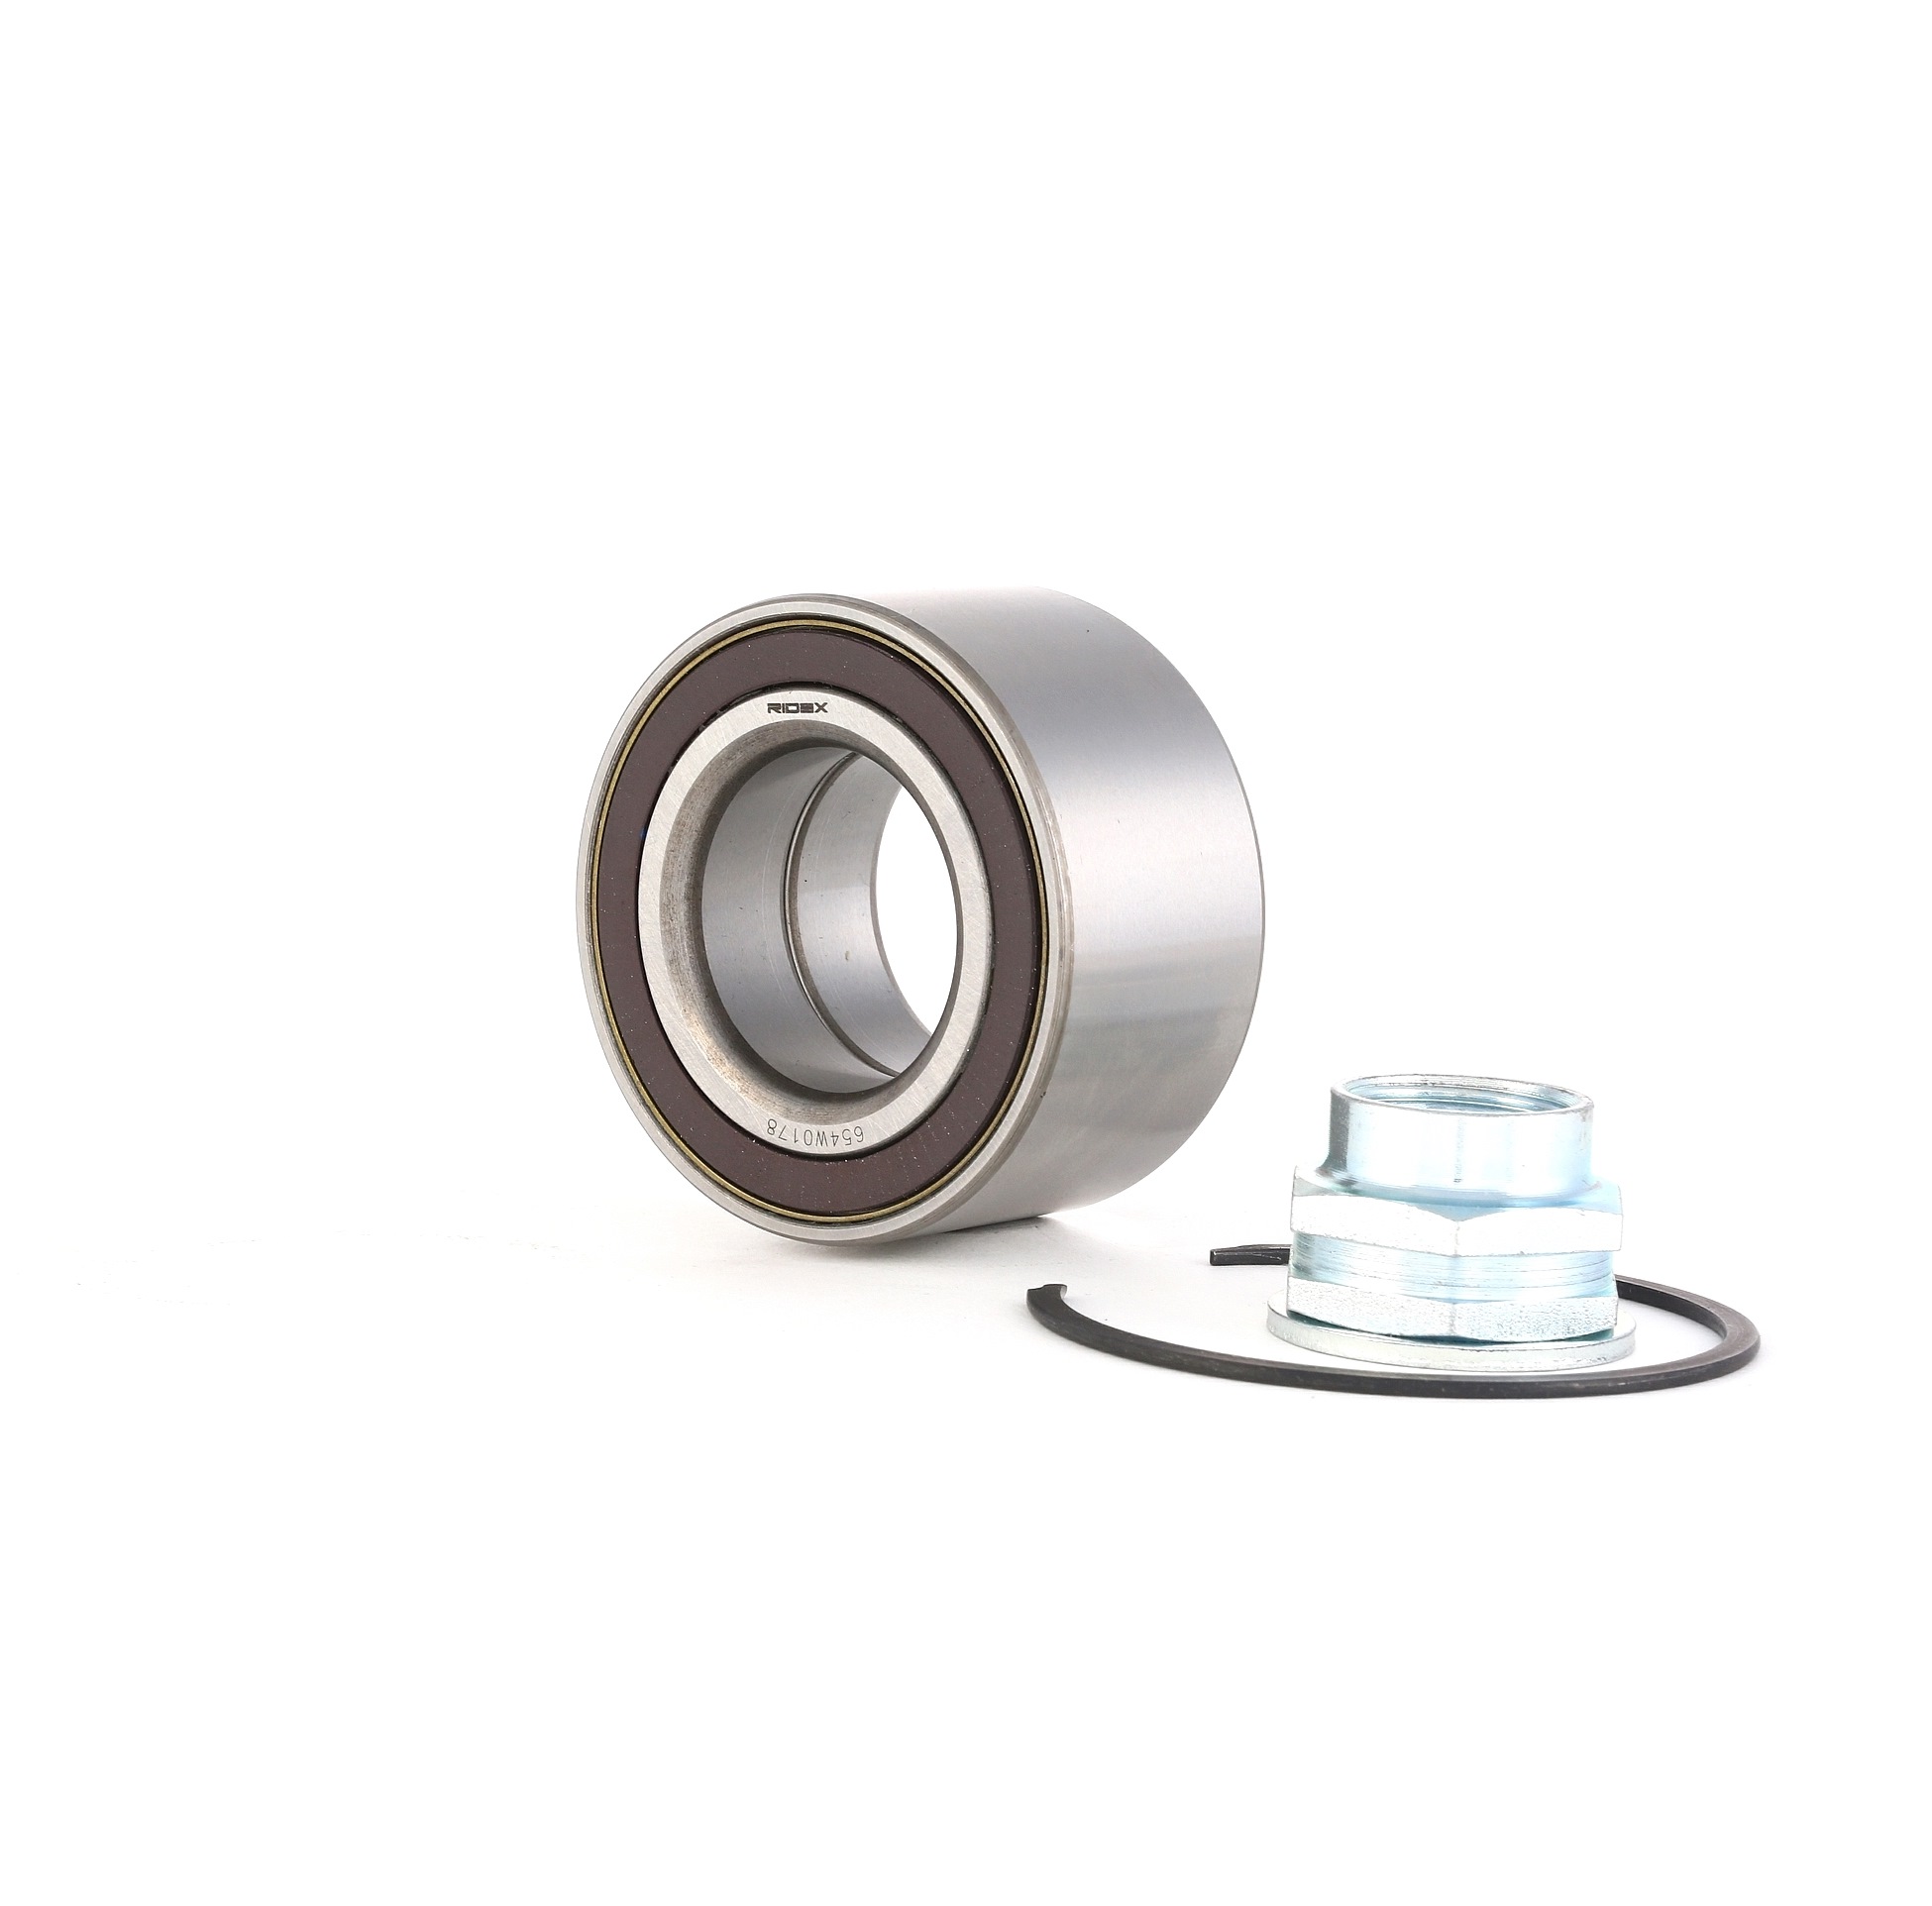 RIDEX 654W0178 original LANCIA Wheel bearing kit Front axle both sides, Rear Axle, with integrated ABS sensor, 66 mm